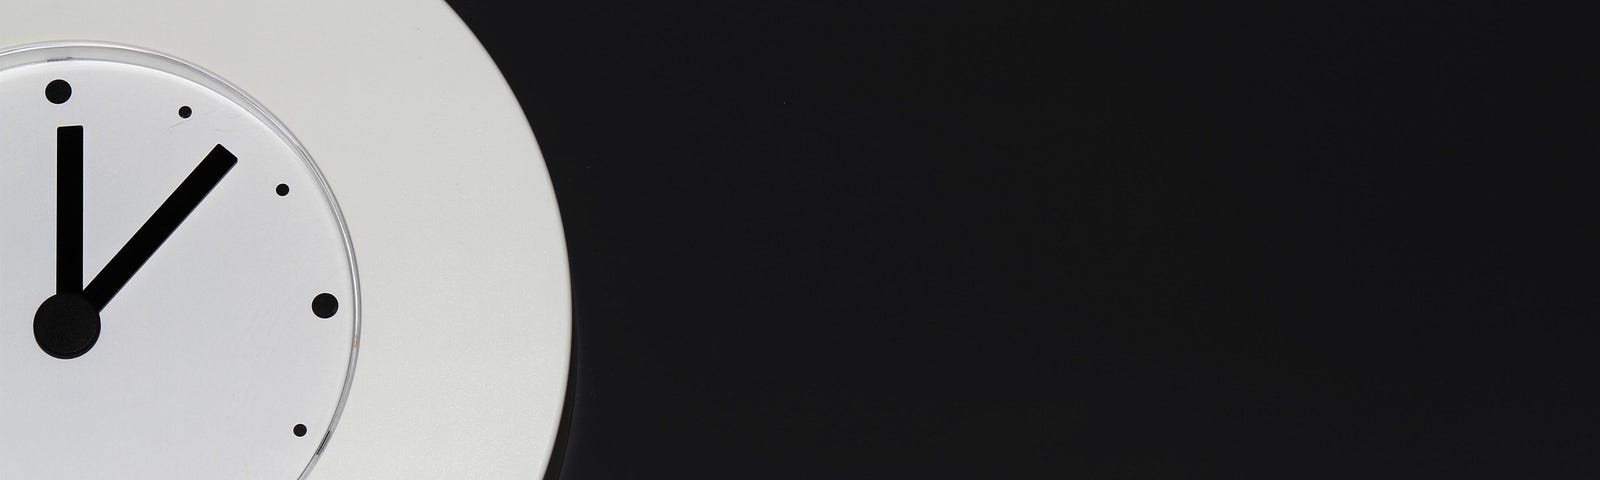 Half of a plain white round clock face with black hands on black background